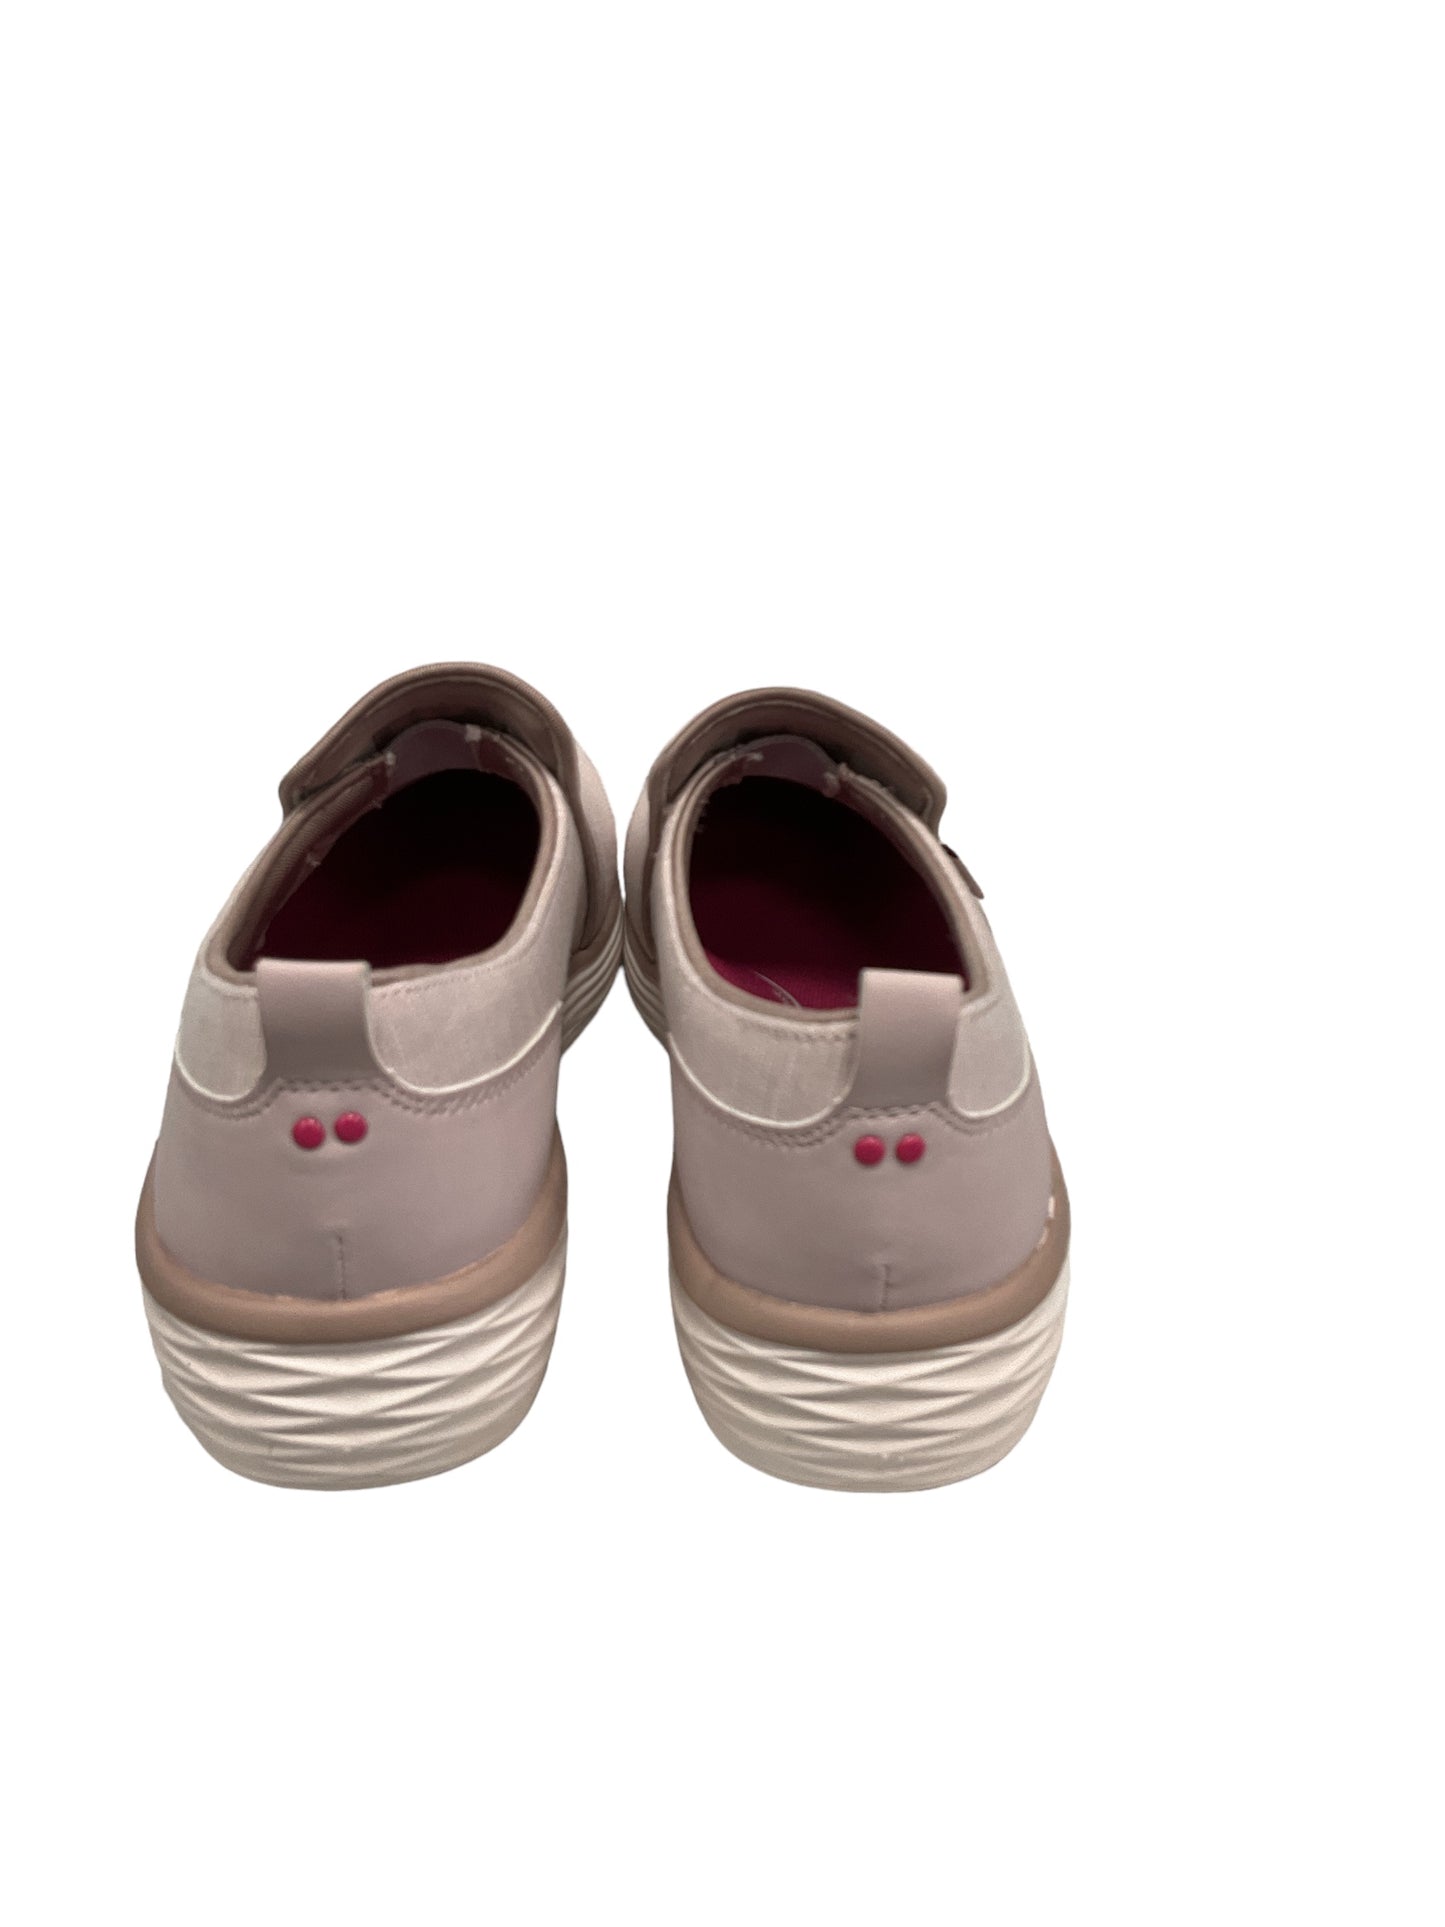 Shoes Sneakers By Ryka  Size: 10